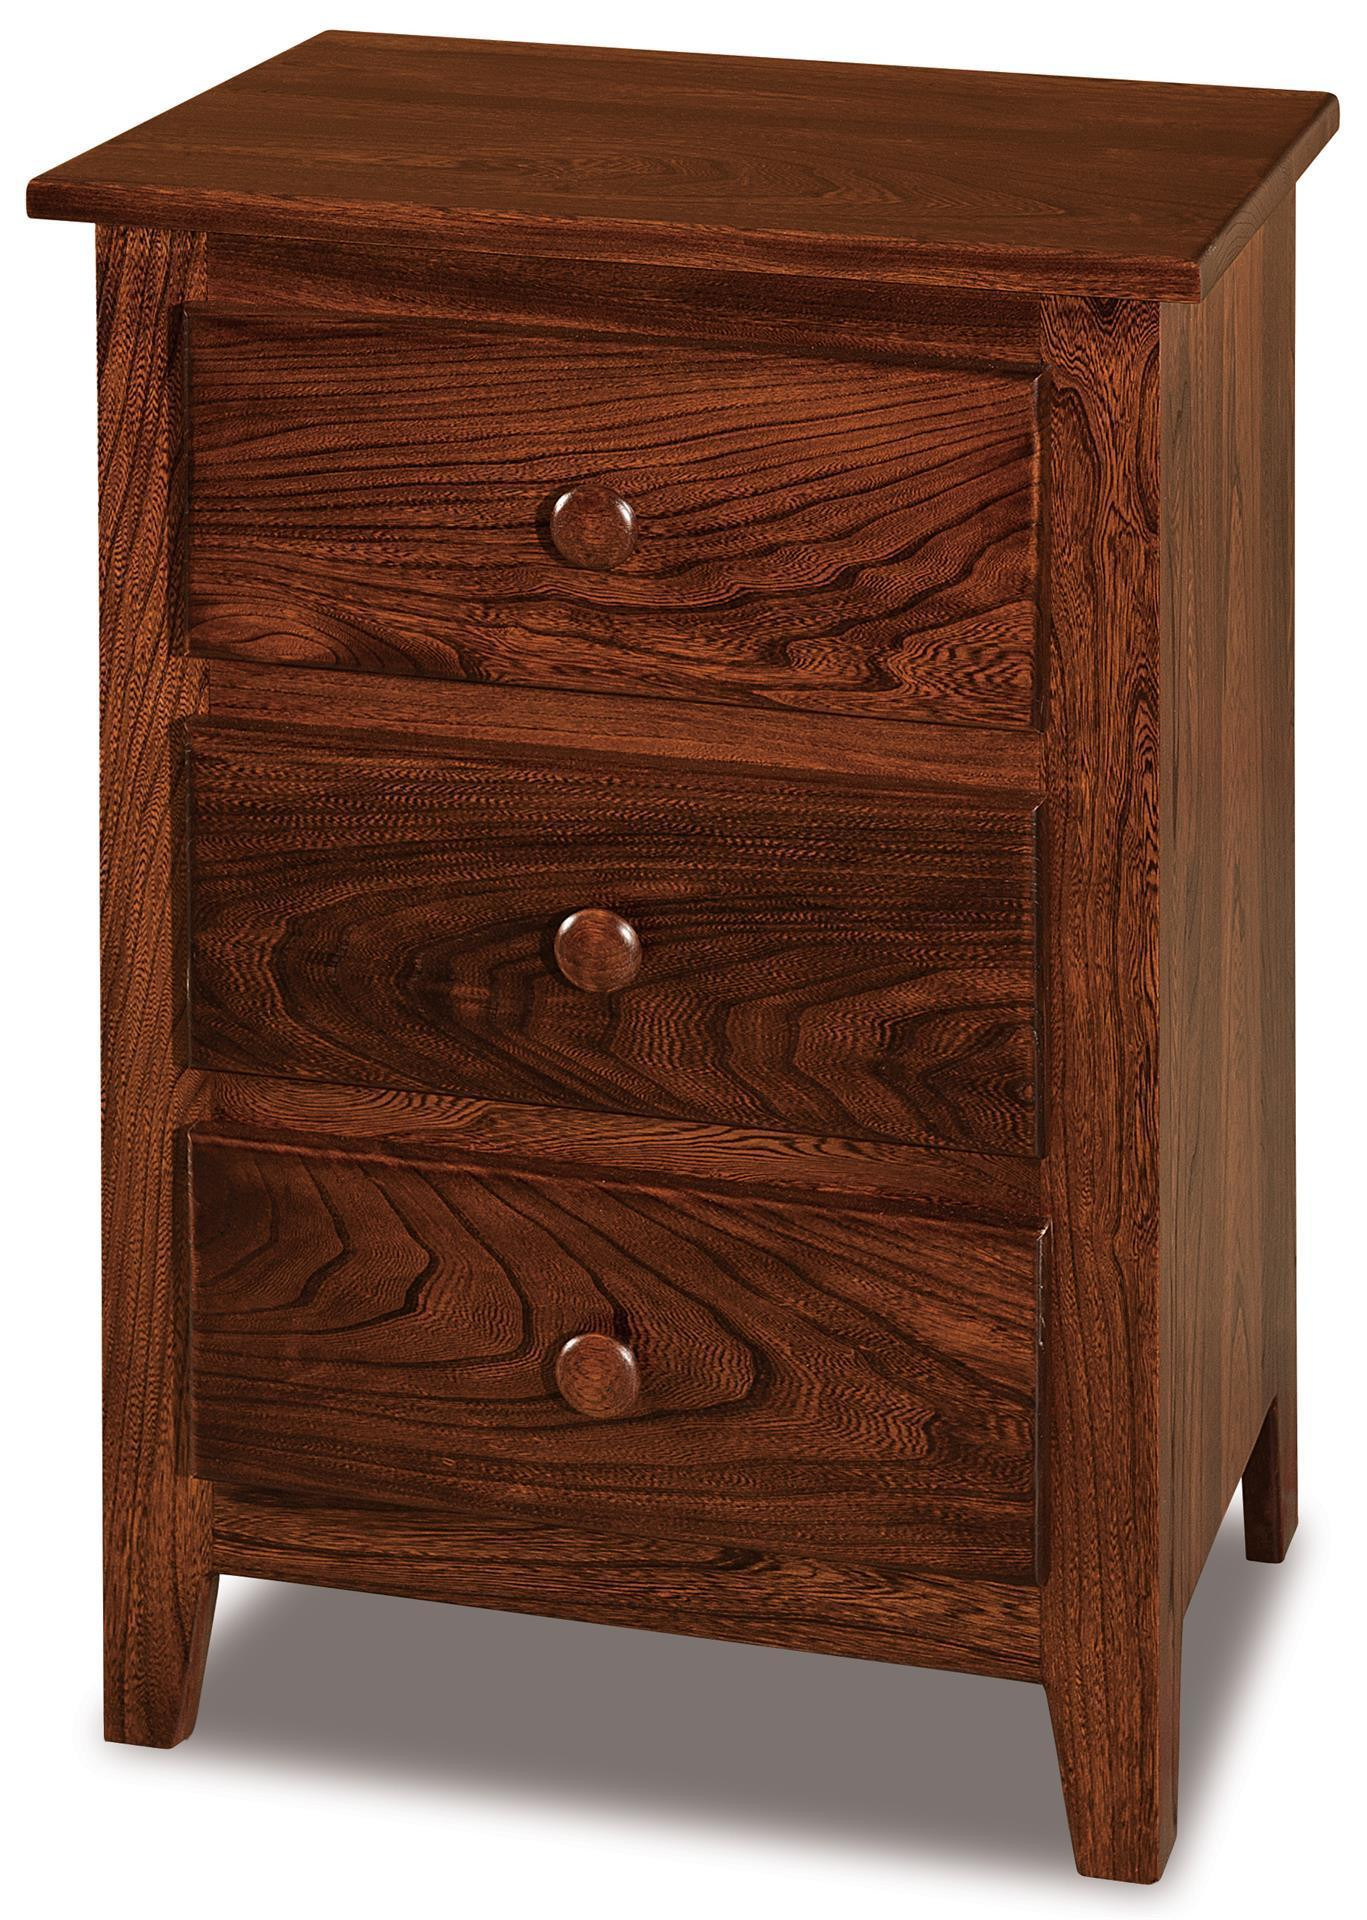 Small Nightstands For Bedroom
 Shaker Small Three Drawer Nightstand from DutchCrafters Amish